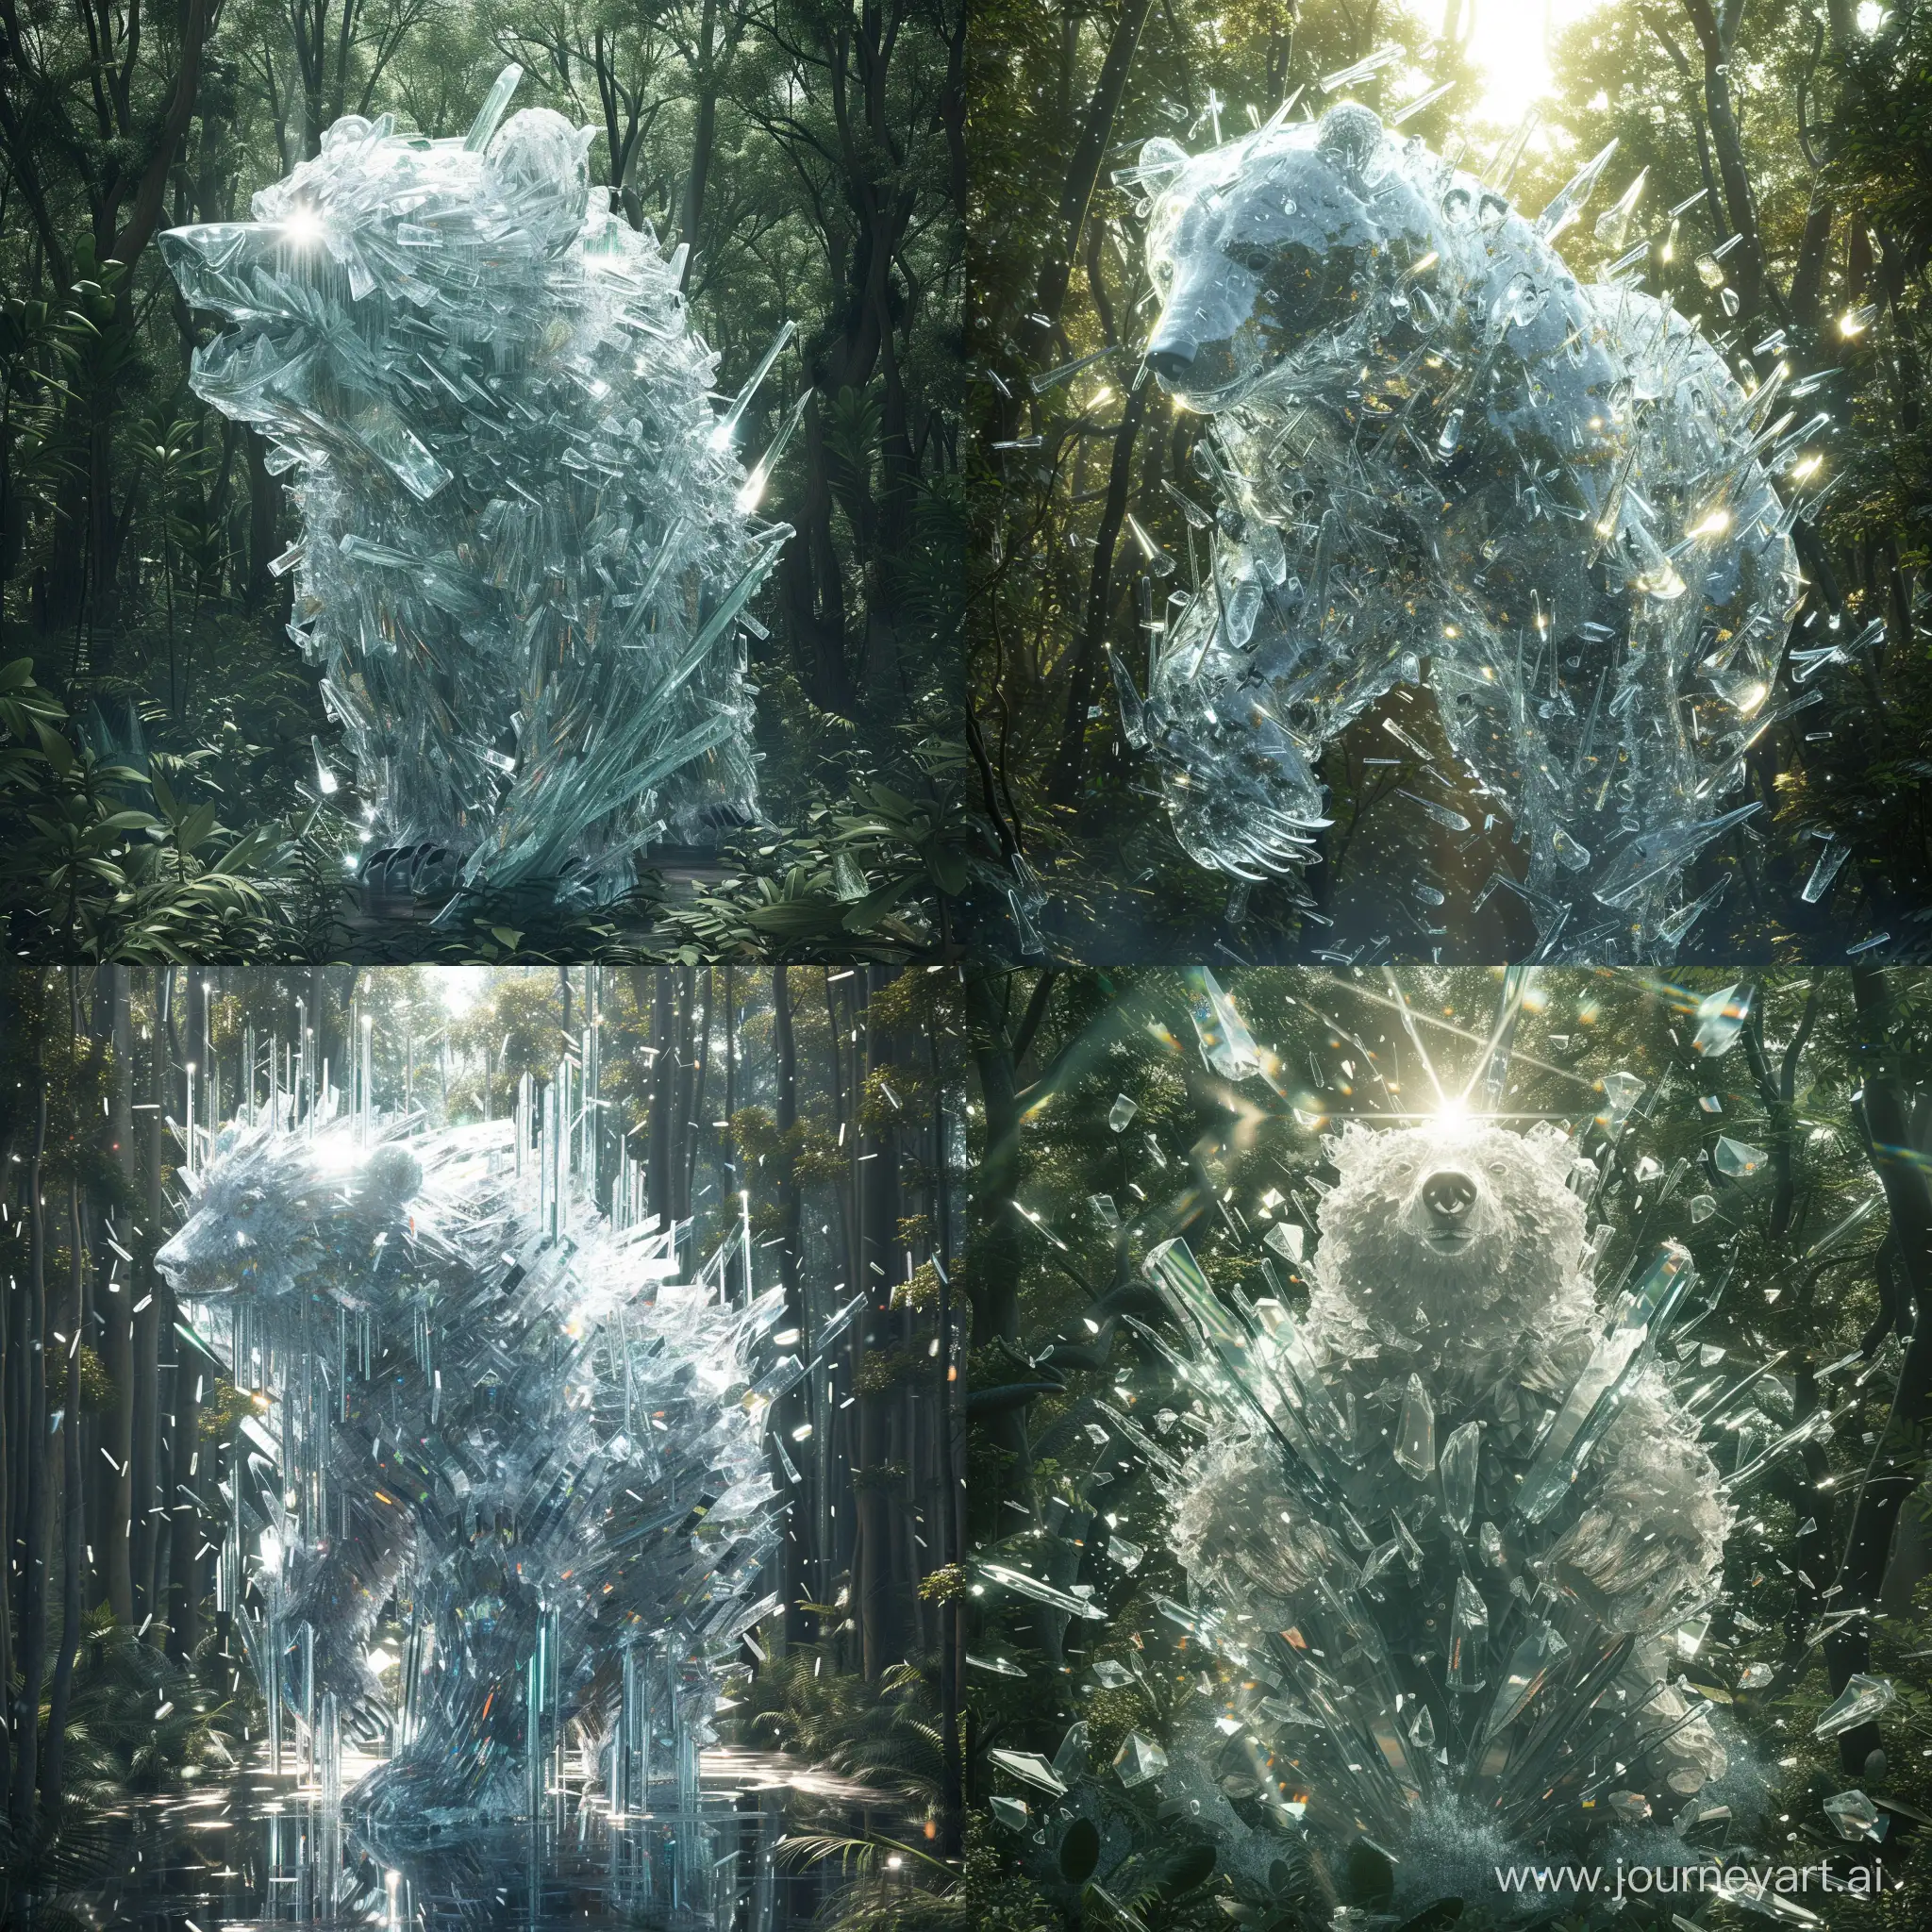 Majestic-Ice-and-Glass-Bear-Sculpture-in-Enchanted-Forest